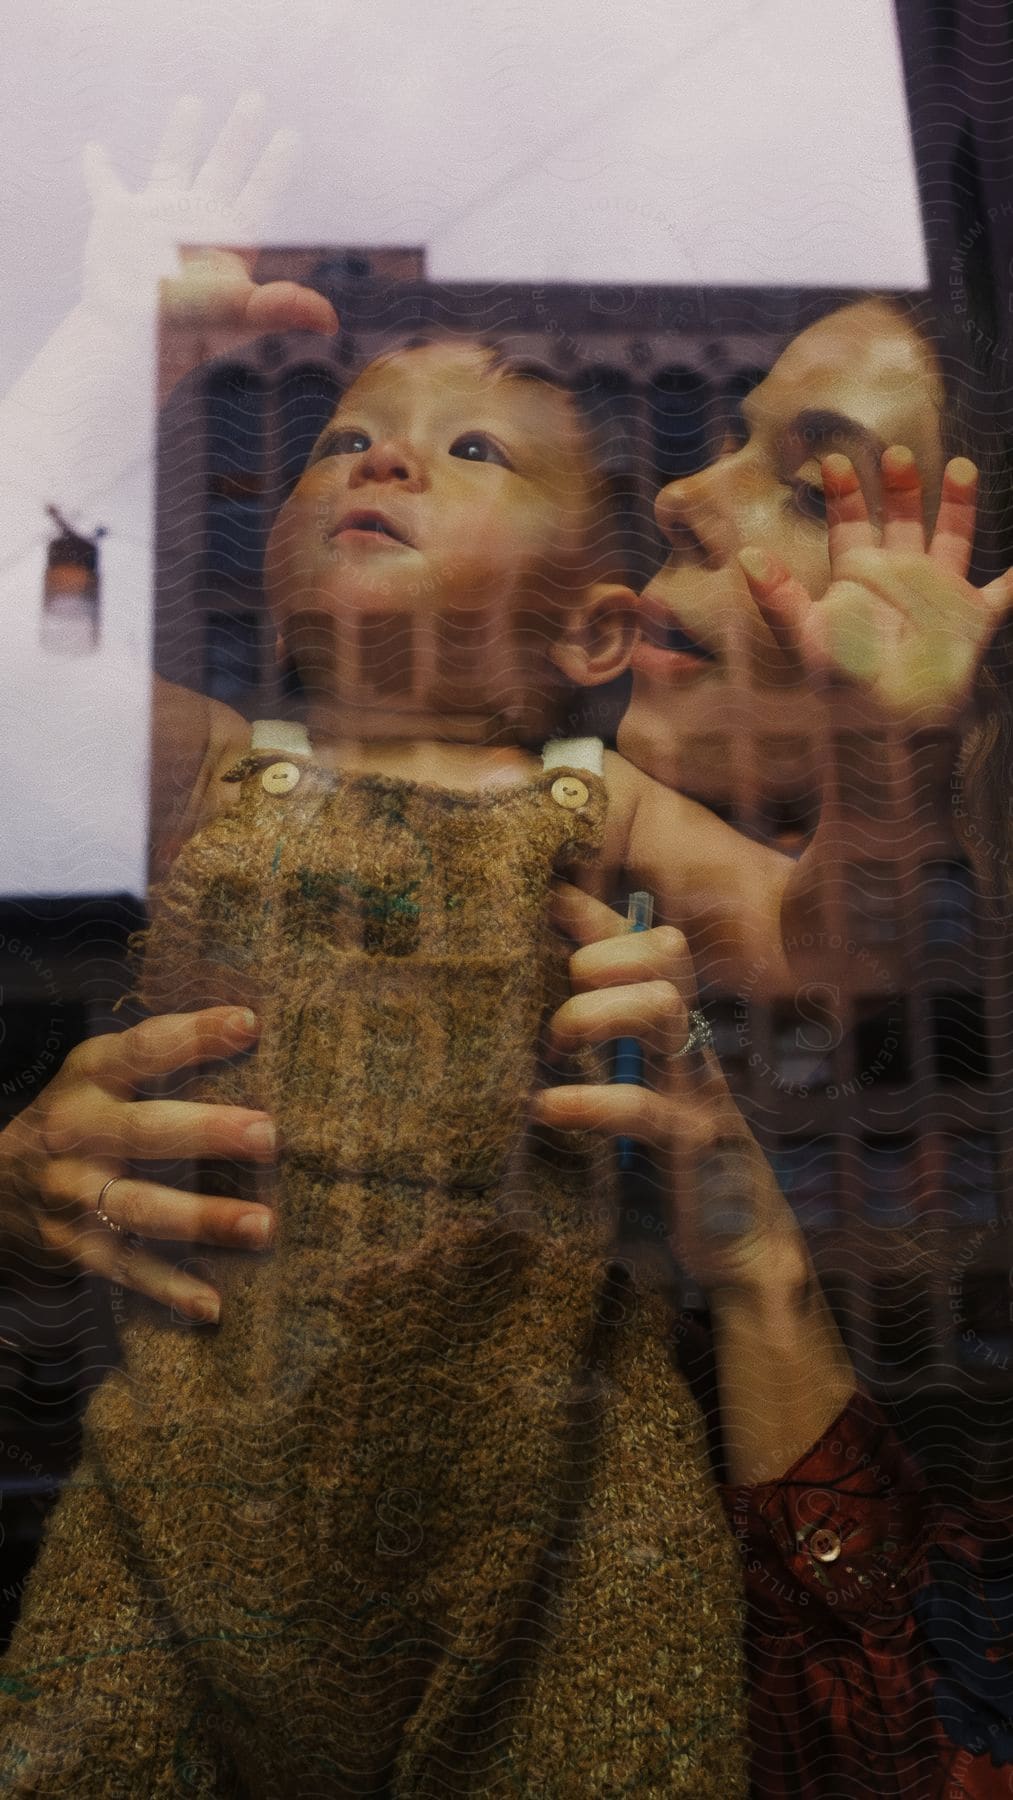 Portrait of toddler and woman as seen through window reflection